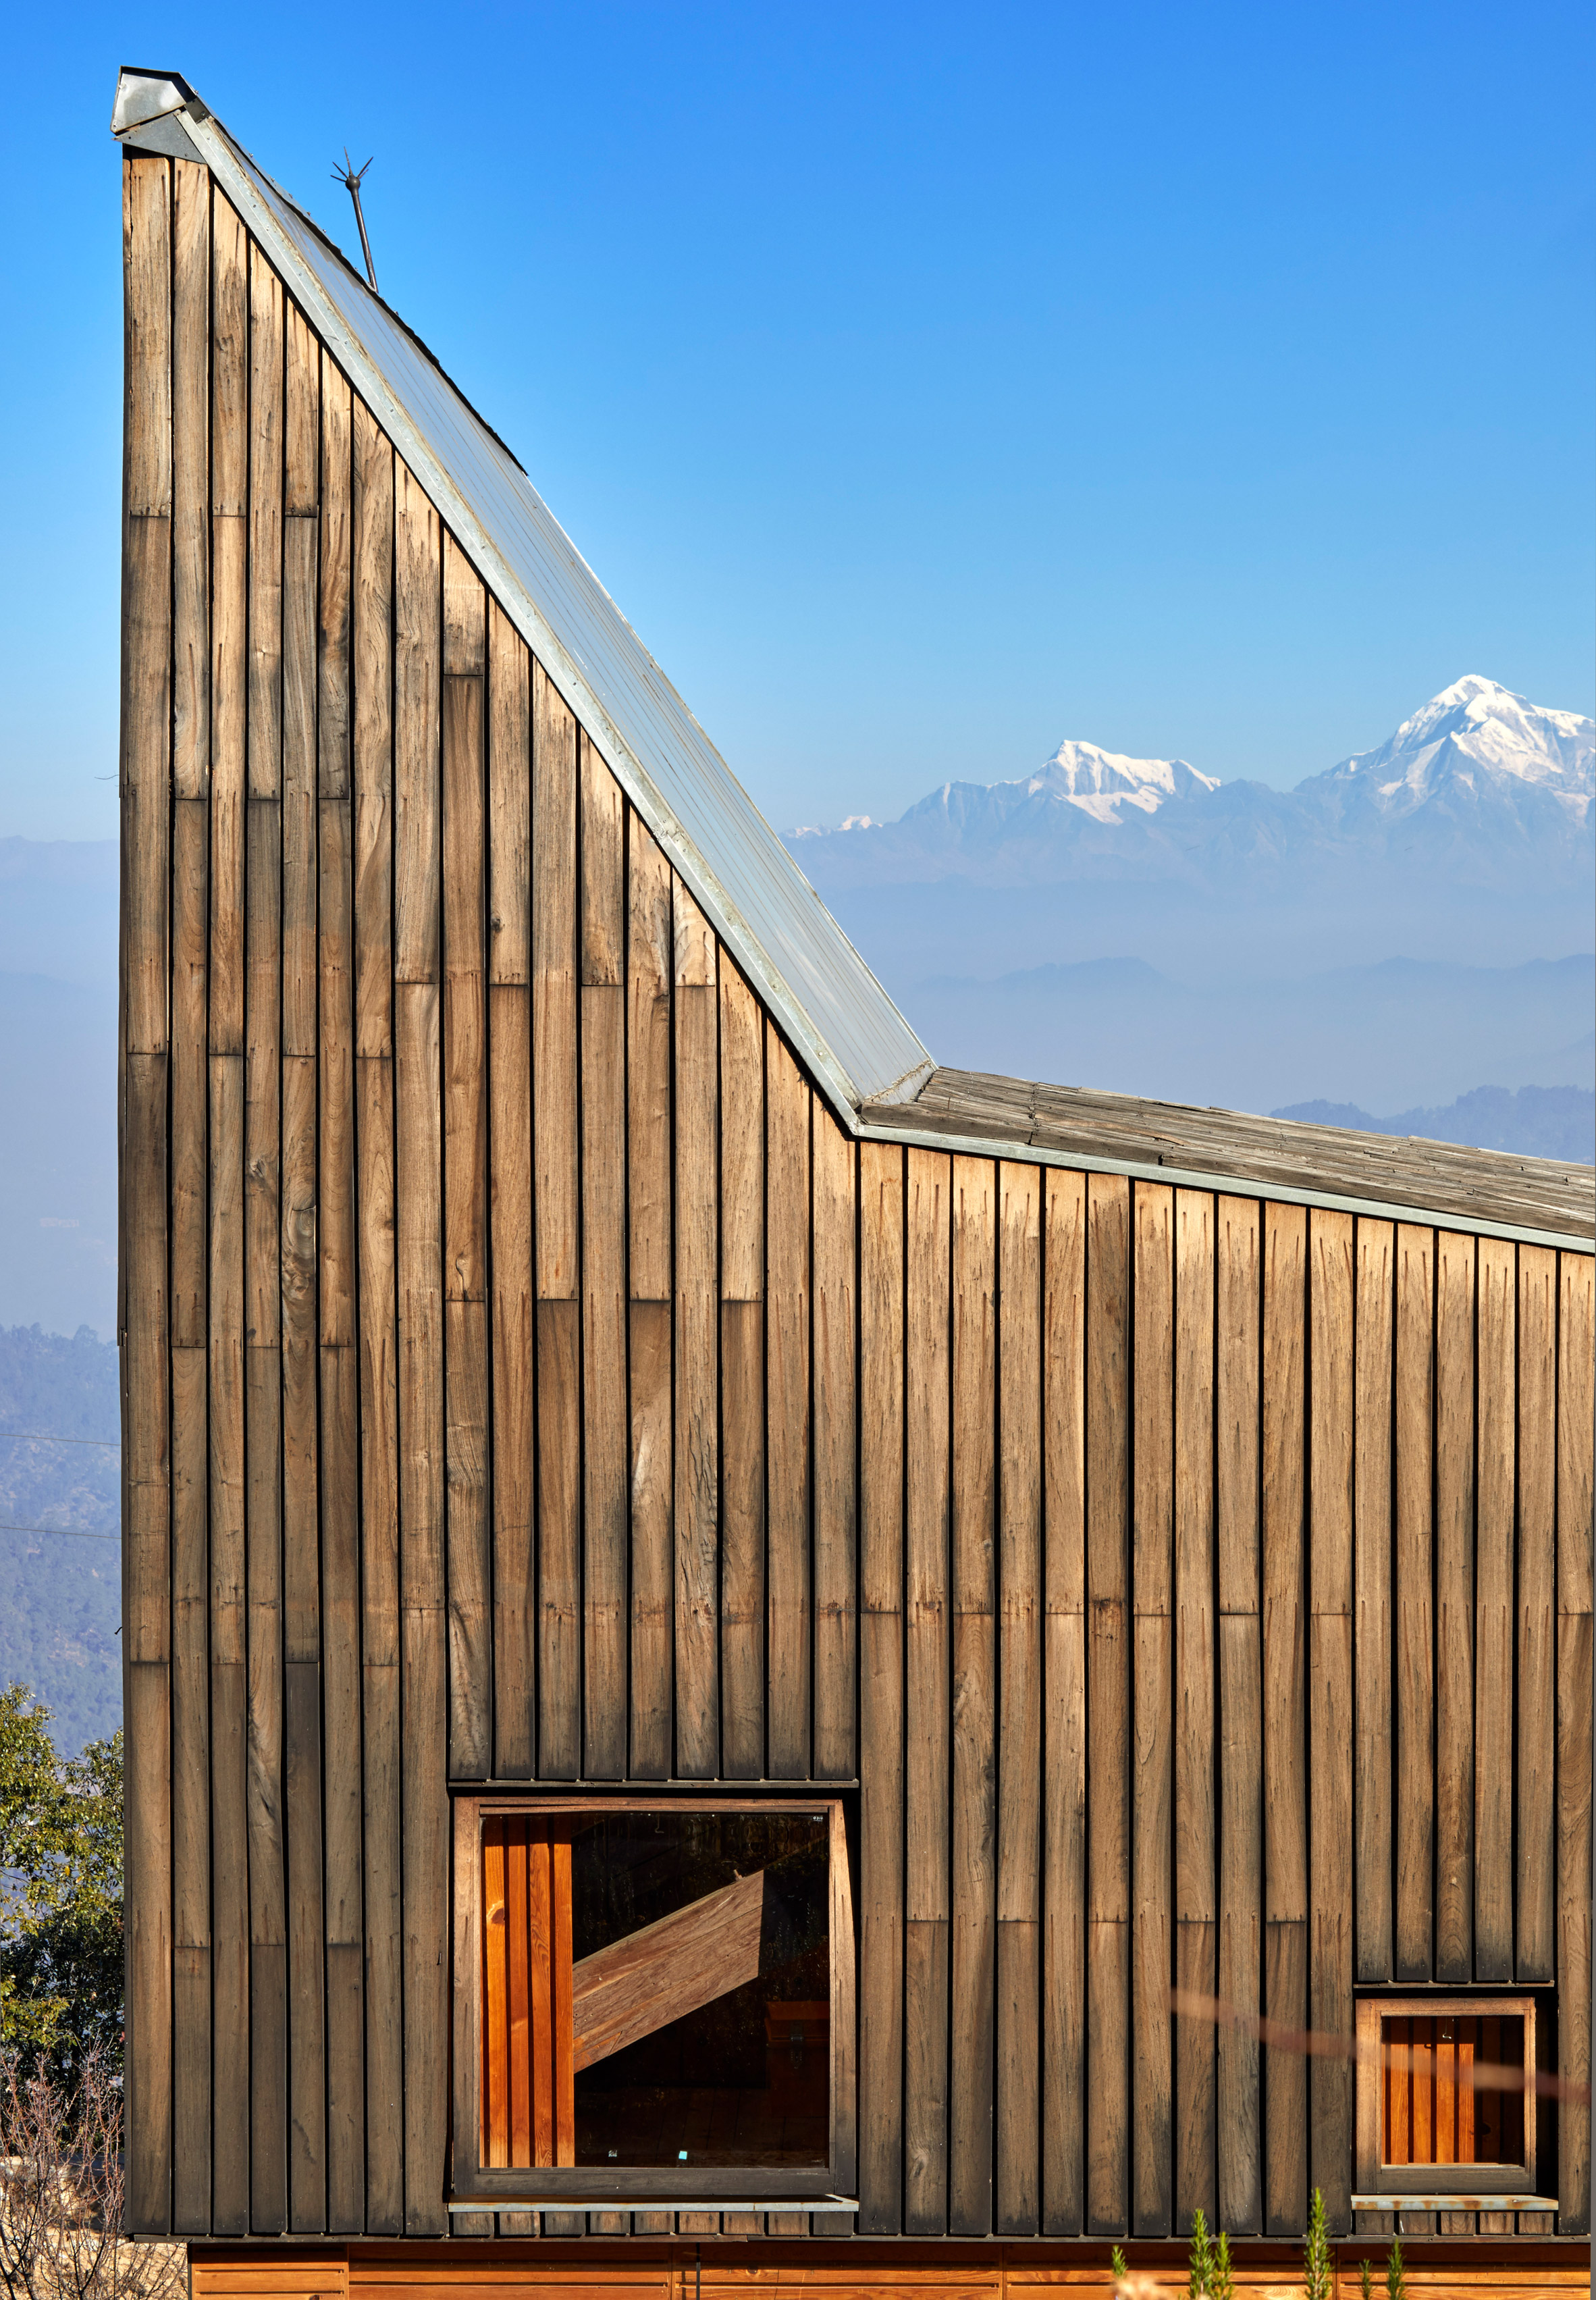 Matra Architects creates holiday home with peaked roof and Himalayan views